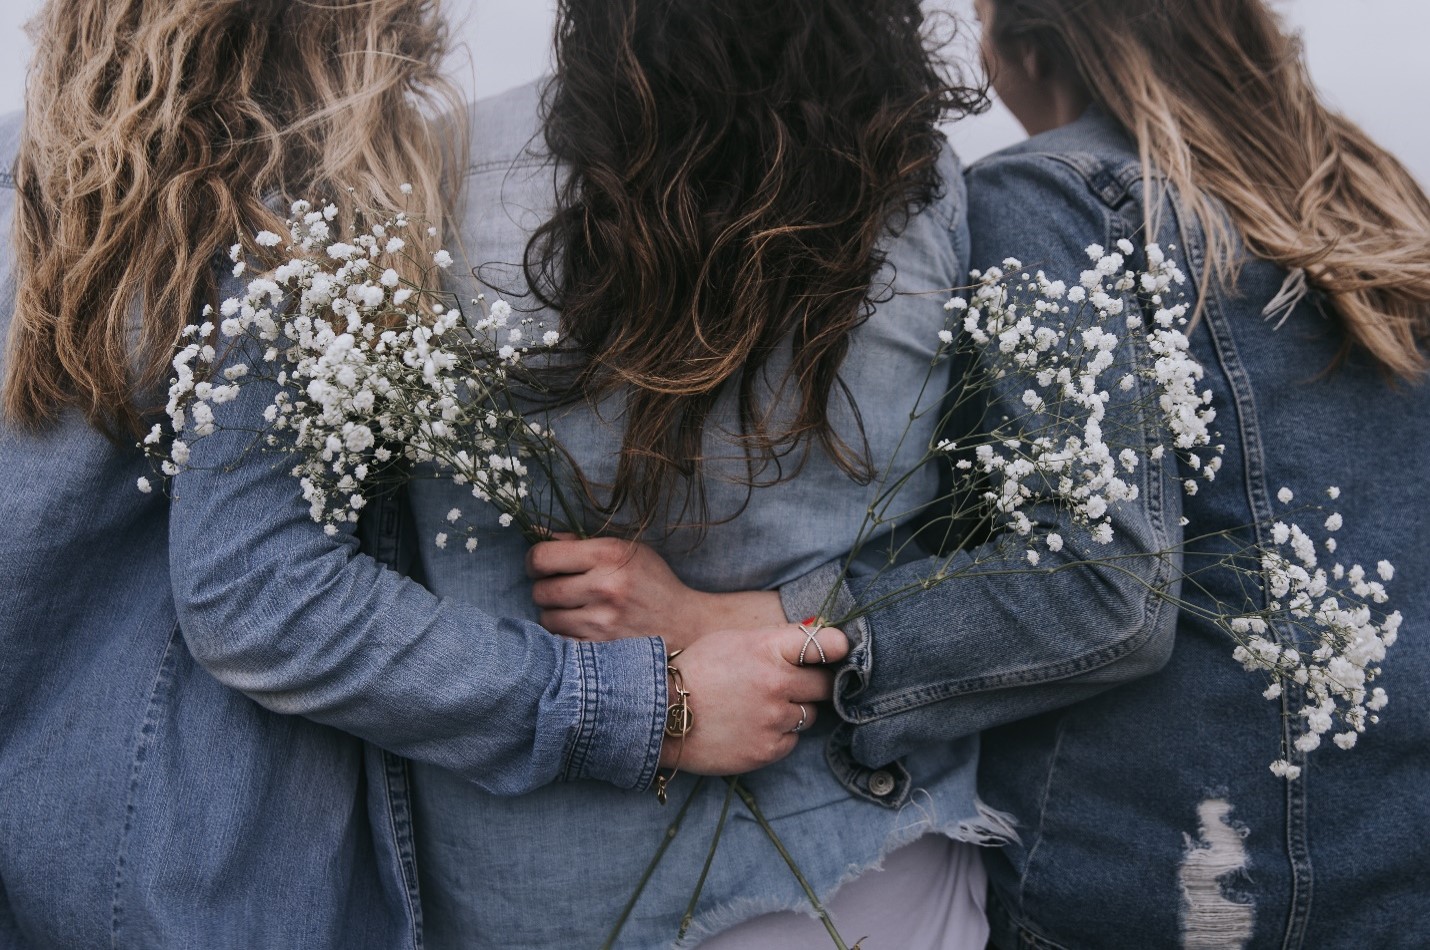 group of three girls holding flowers with arms around each other